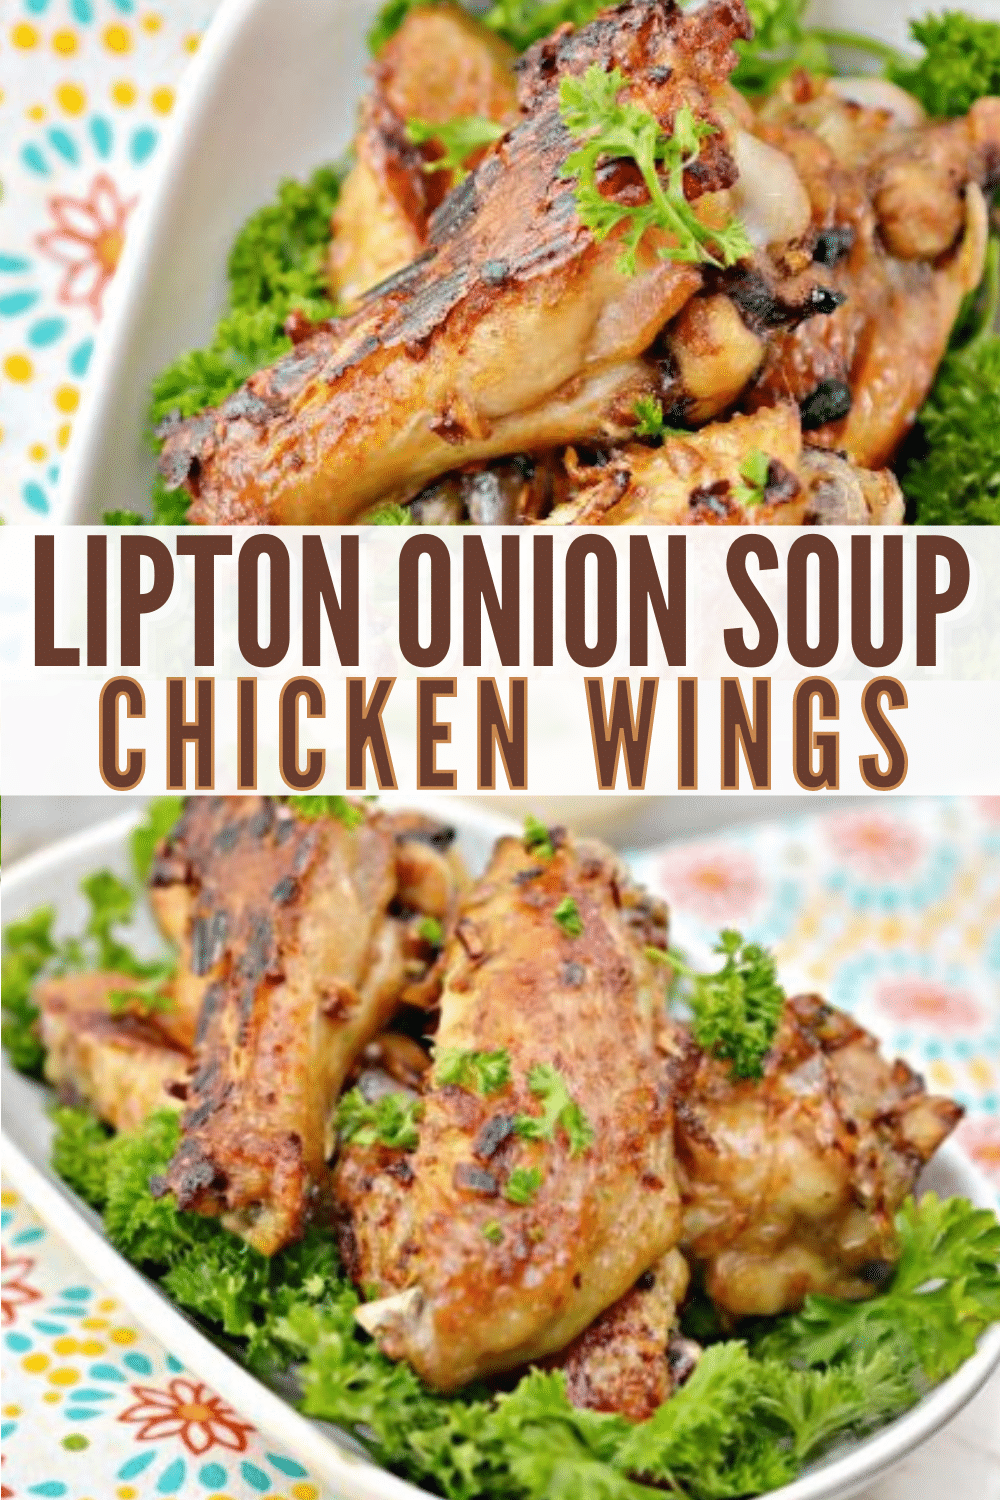 These Lipton onion soup chicken wings are so easy to make in the oven and are flavorful and delicious. This recipe only has 3 ingredients too. #chicken #chickenwings #3ingredients via @wondermomwannab